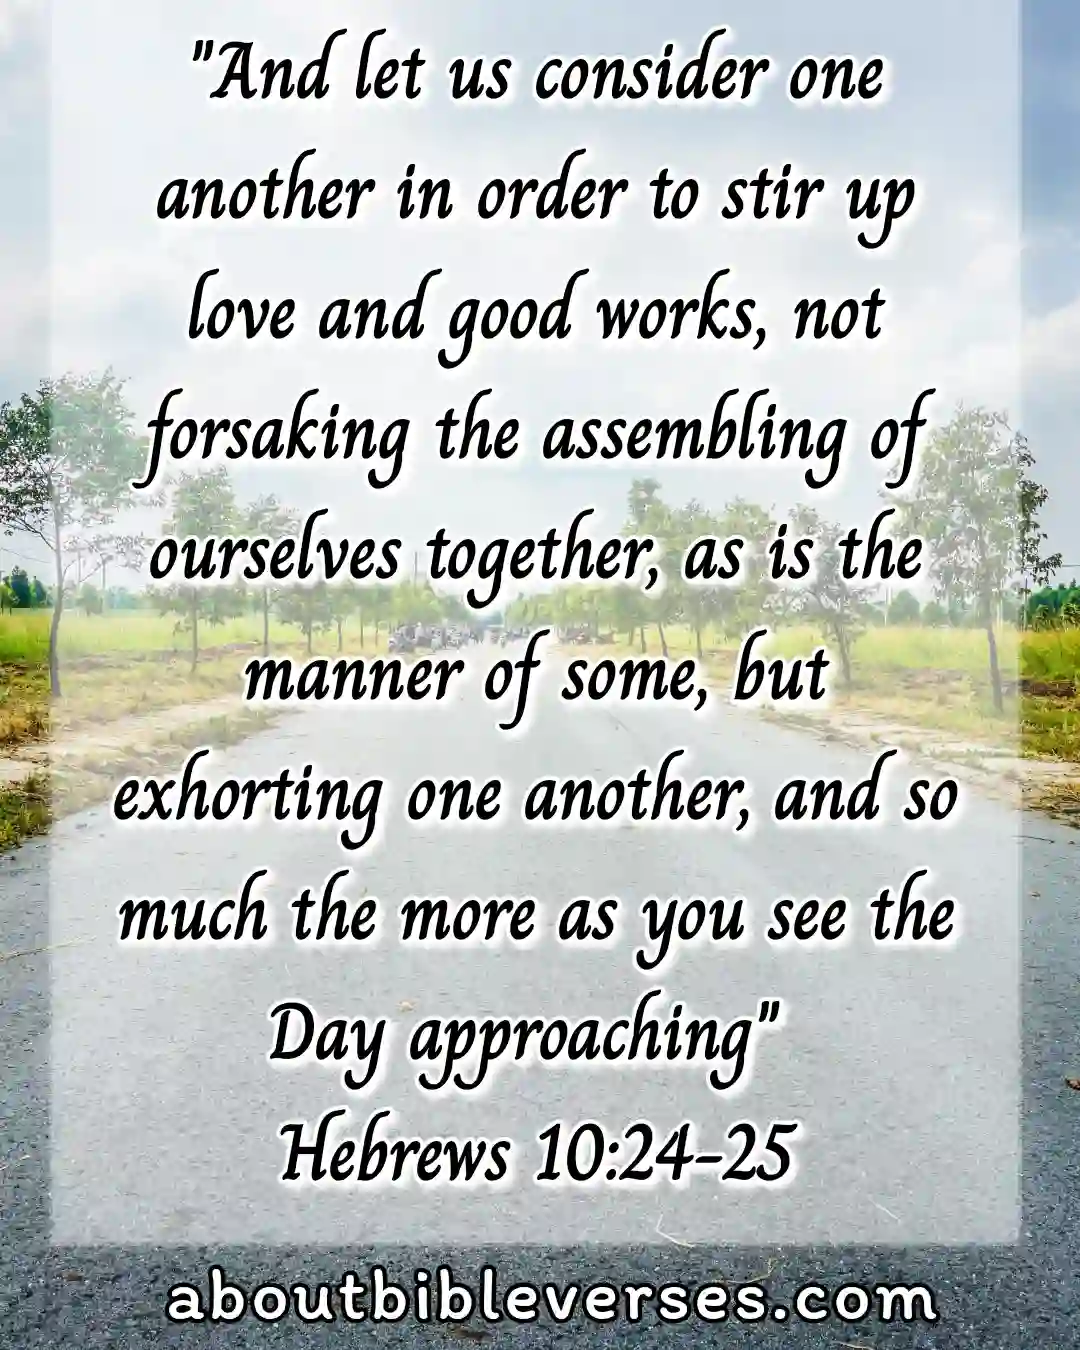 Bible Verses About Unity And Working Together (Hebrews 10:24-25)